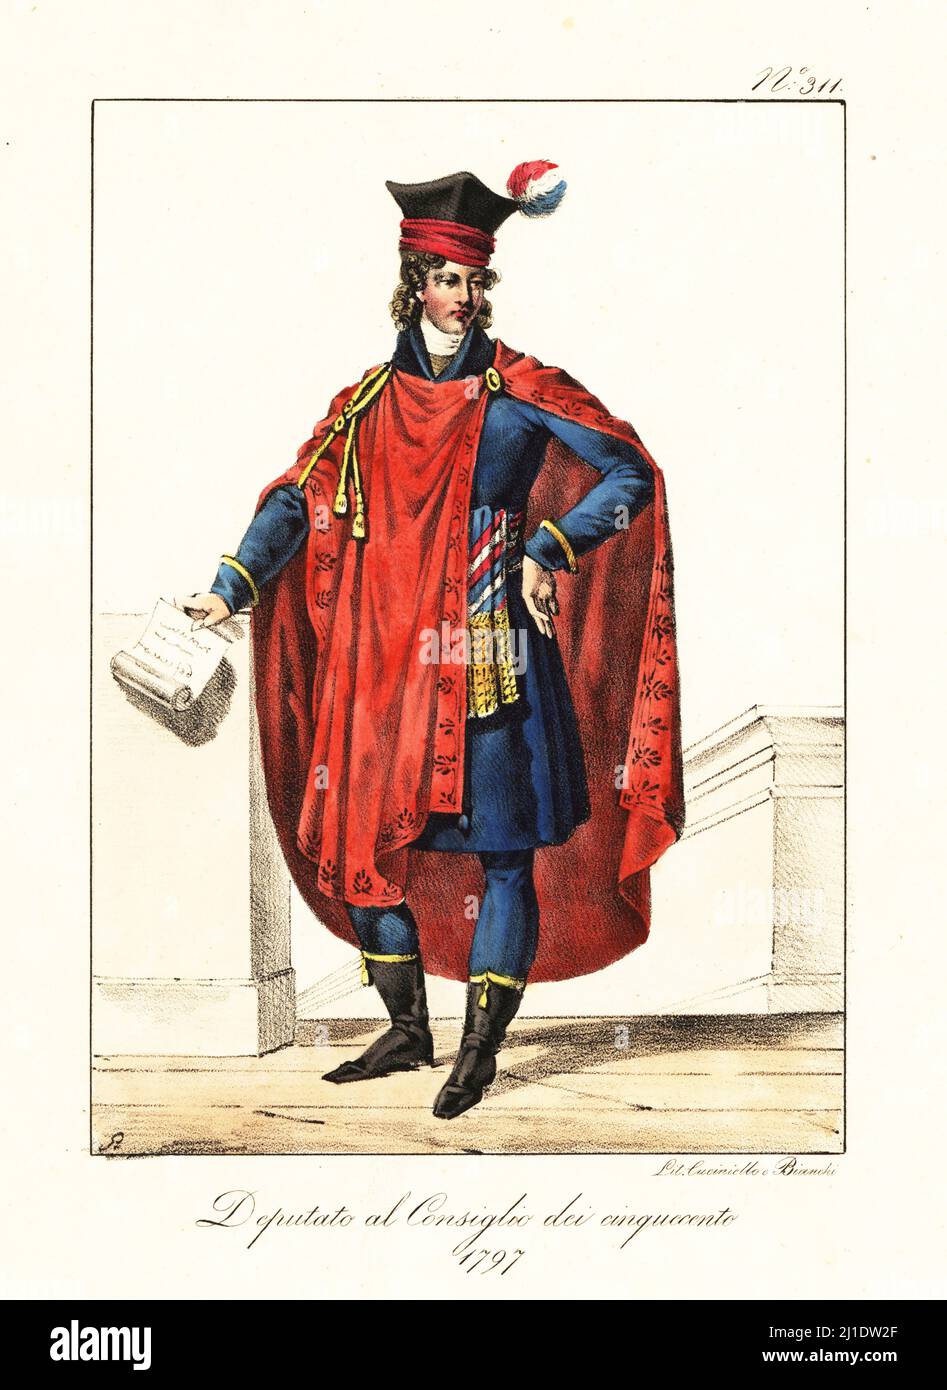 Ceremonial costume of a deputy of the Council of Five Hundred, 1797. Formed  in 1795 during the Directoire. In hat with tricolor plume, scarlet cape,  tricolor sash, blue coat and hose, calf-length